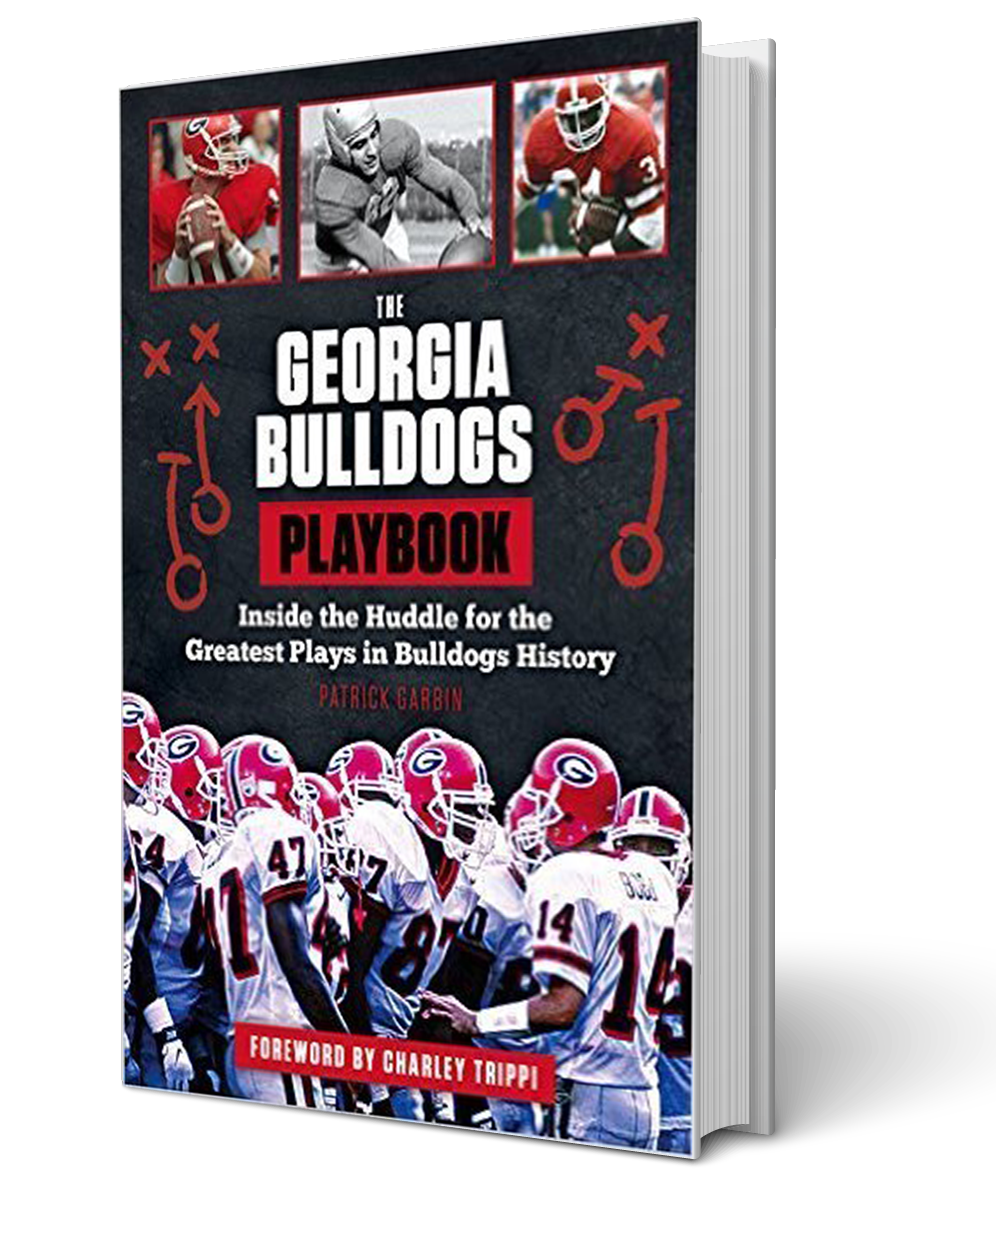 THE GEORGIA BULLDOGS PLAYBOOK: Inside the Huddle for the Greatest Plays in Bulldogs History